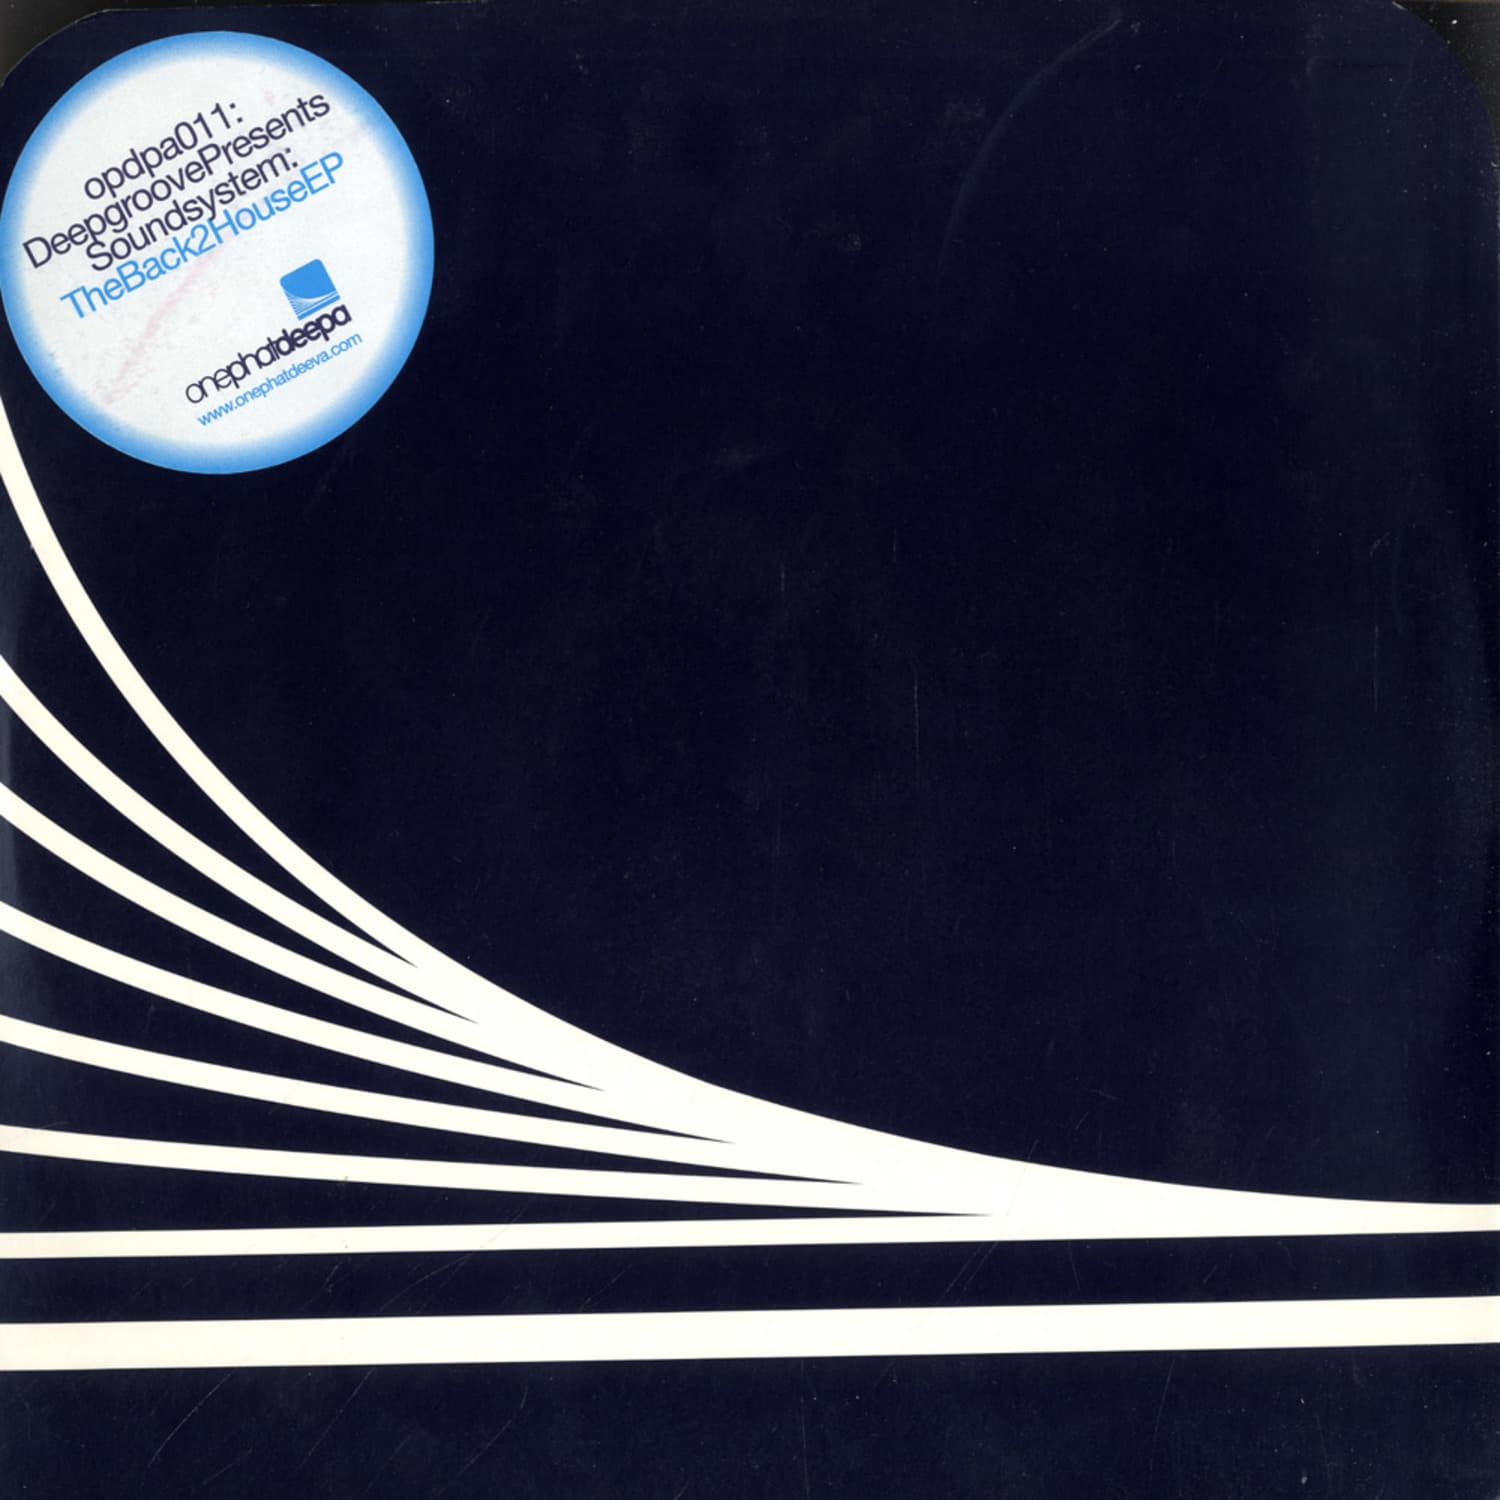 Deepgroove Pres Soundsystem - THE BACK 2 HOUSE EP